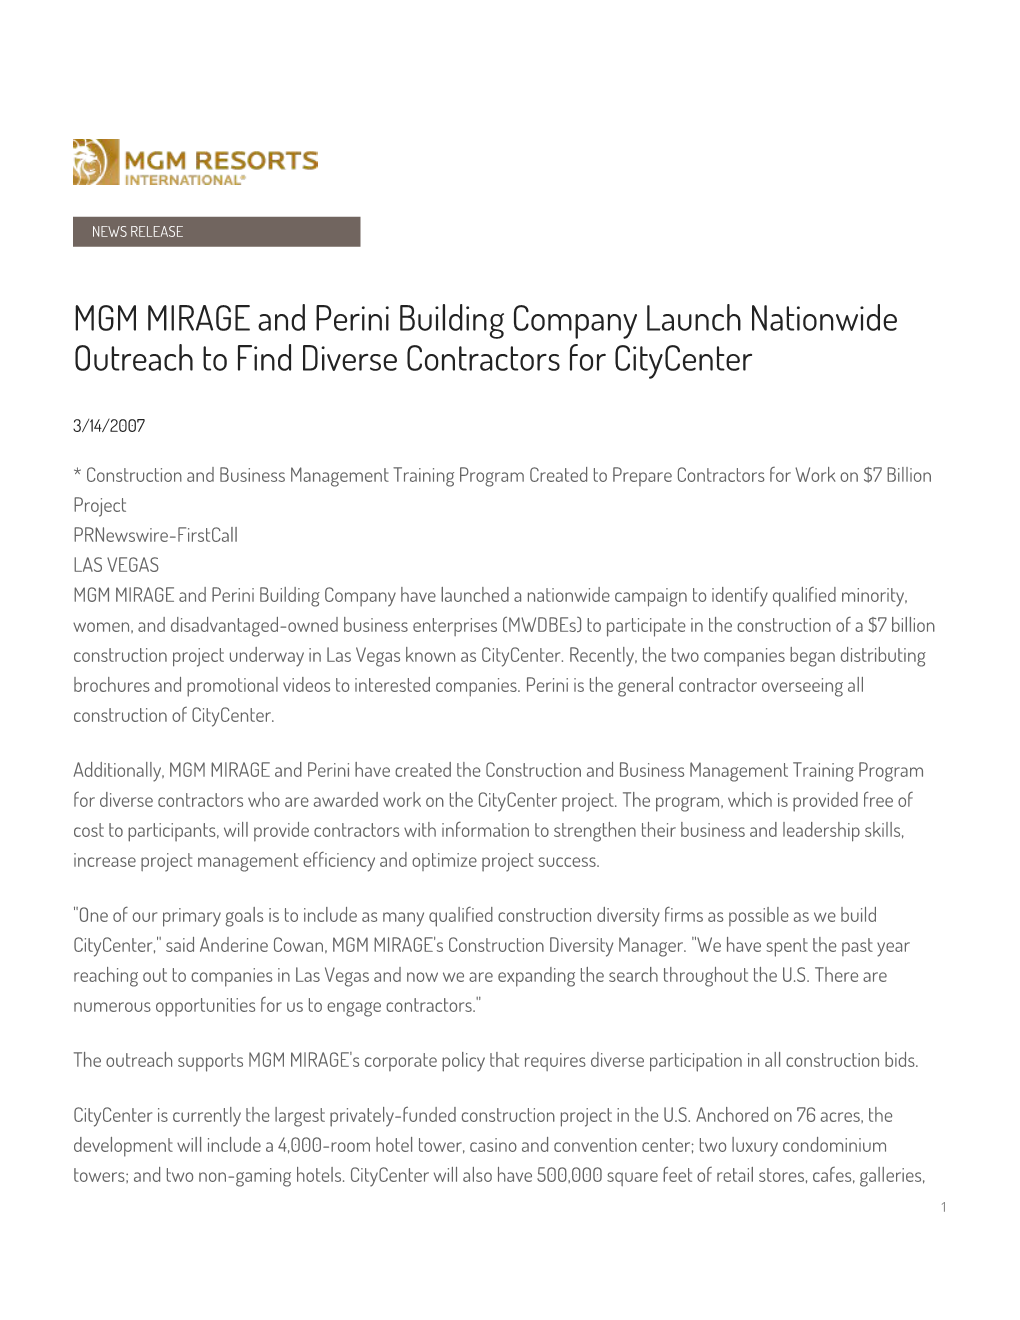 MGM MIRAGE and Perini Building Company Launch Nationwide Outreach to Find Diverse Contractors for Citycenter